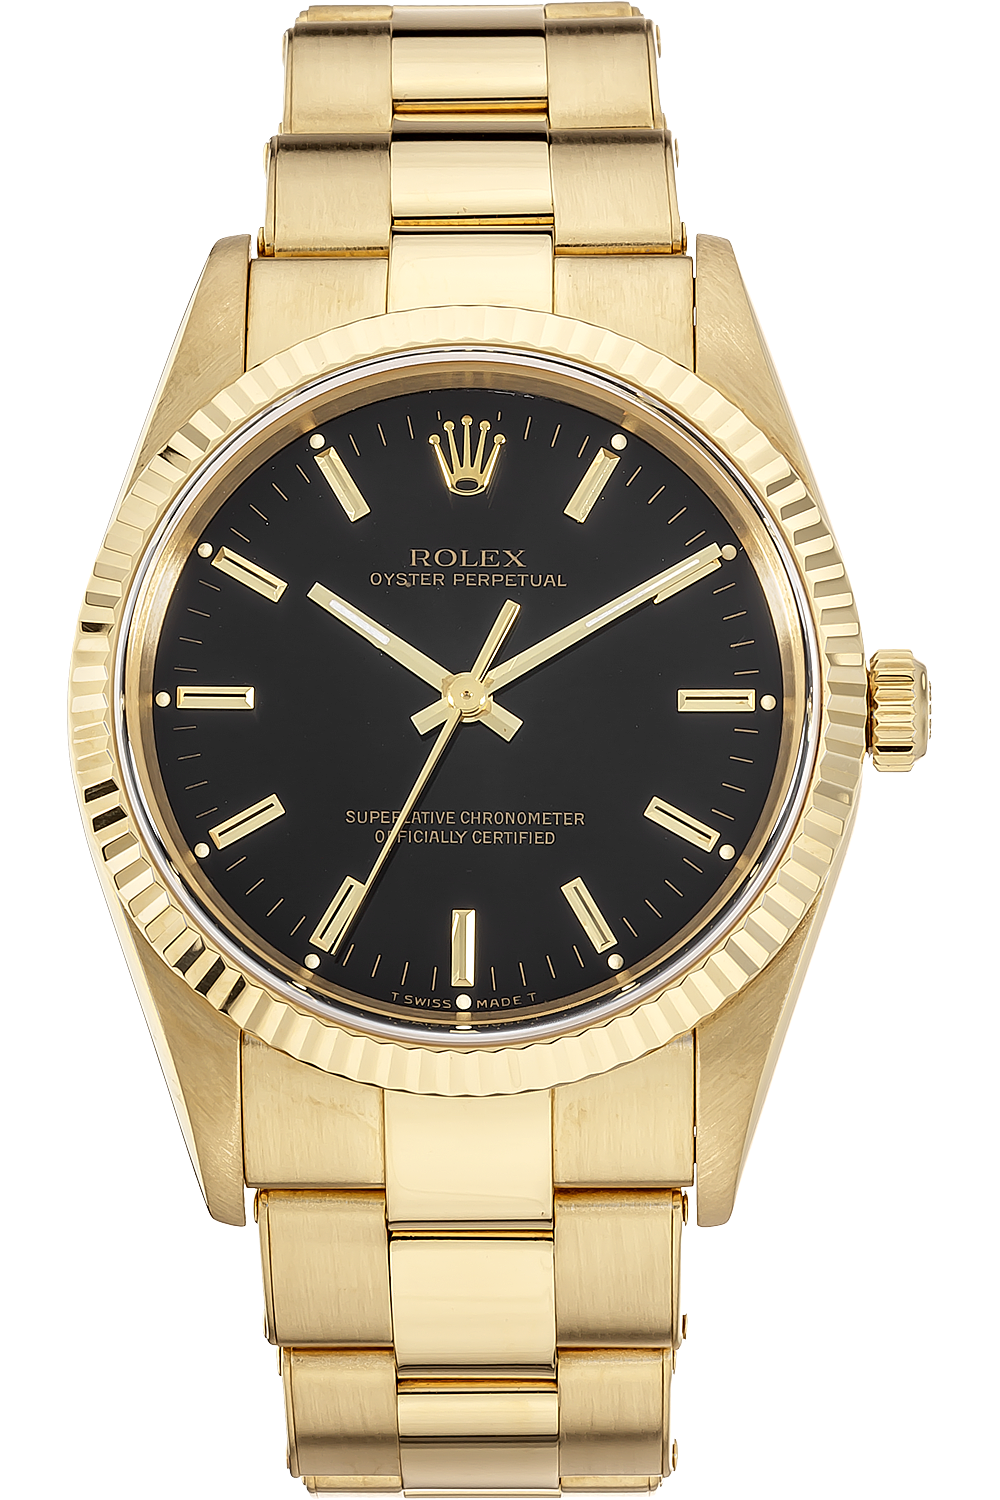 Review: Rolex Oyster Perpetual 14238